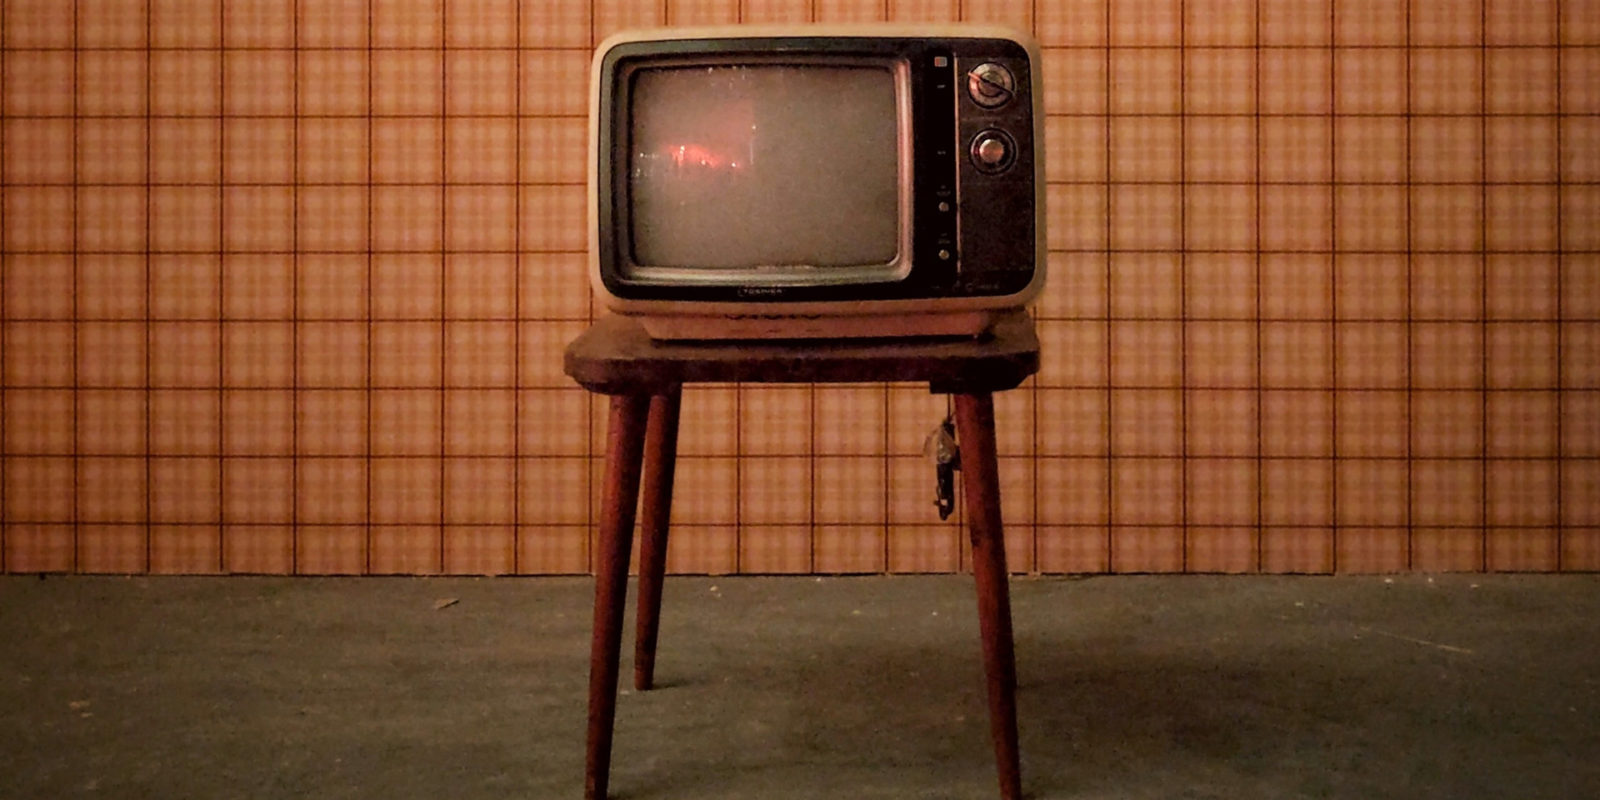 Old fashioned TV